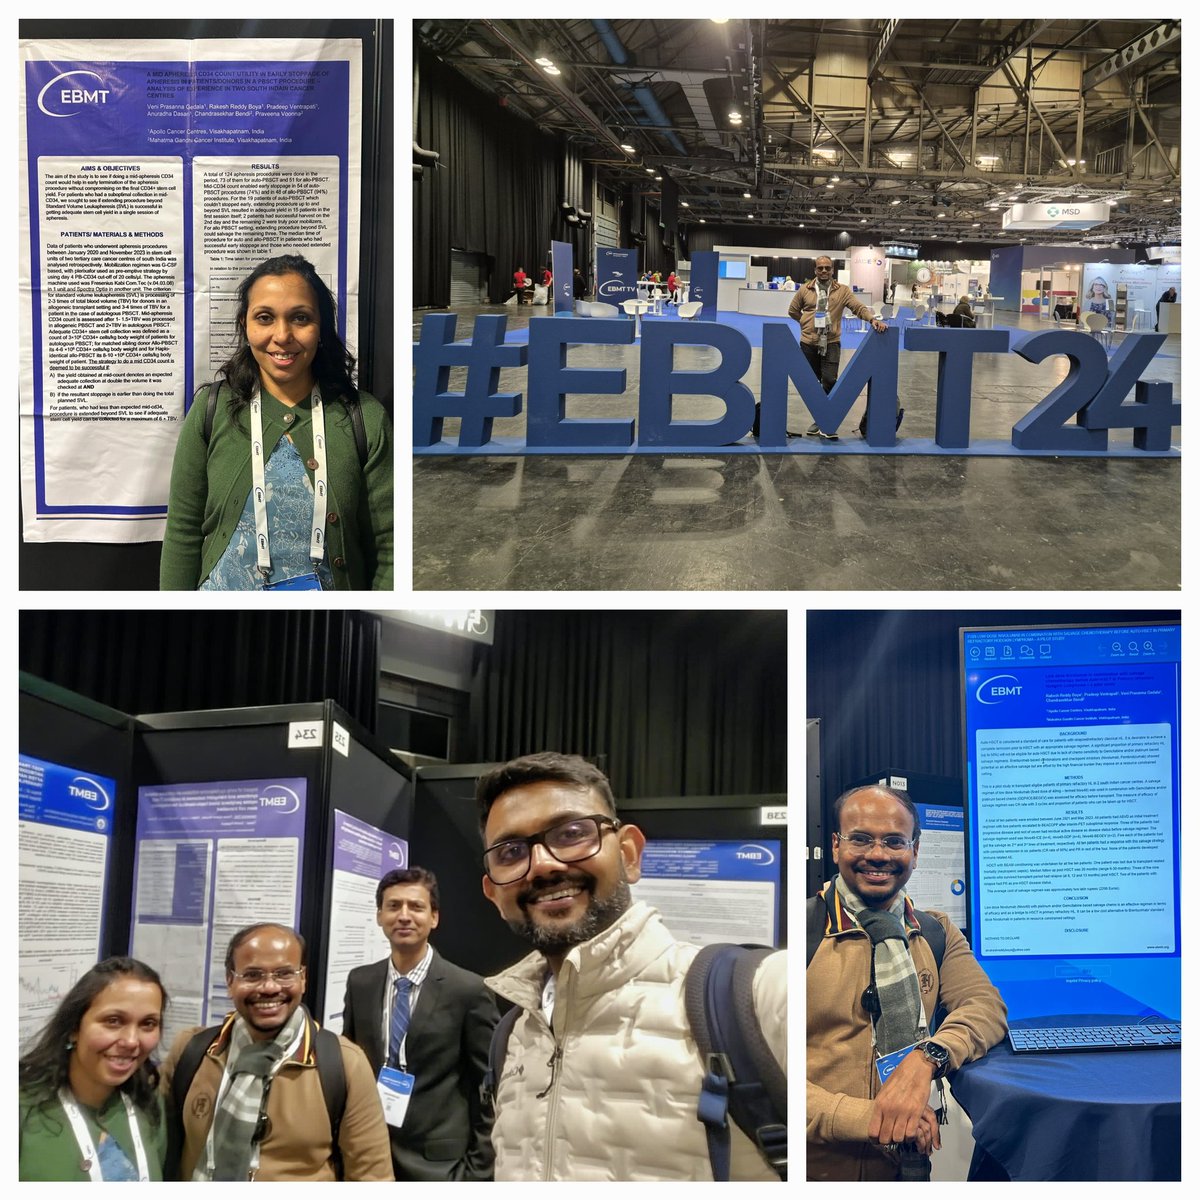 Presenting our academic work at #EBMT24.. And experiencing the beauty of #Scottish highlands. @veerendra_patil
#lochness #isleofskye #inverness